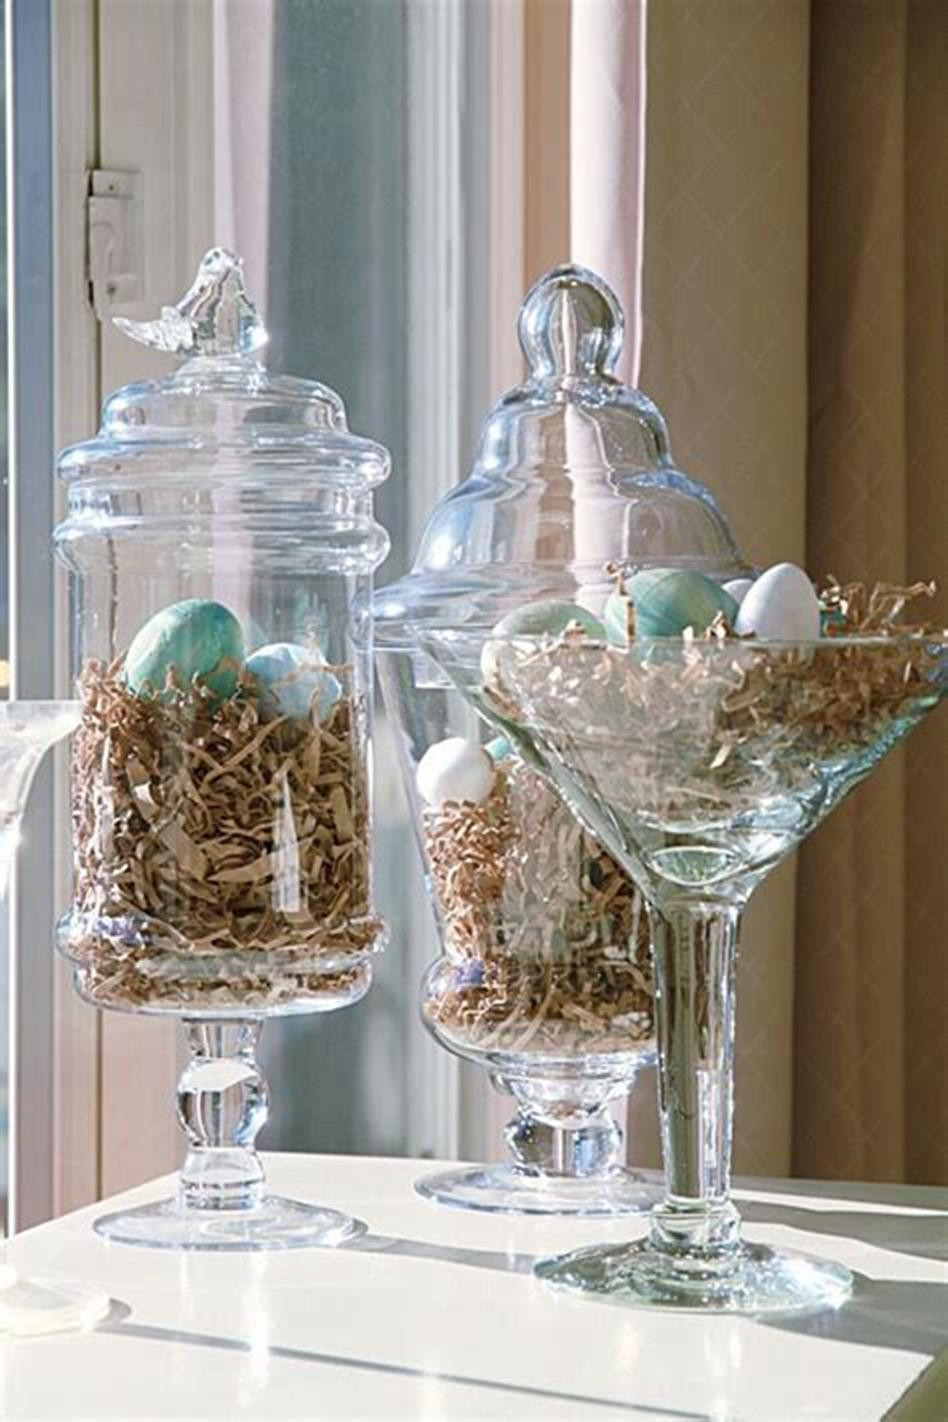 Easter Home Decorating Ideas
 40 Beautiful DIY Easter Table Decorating Ideas for Spring